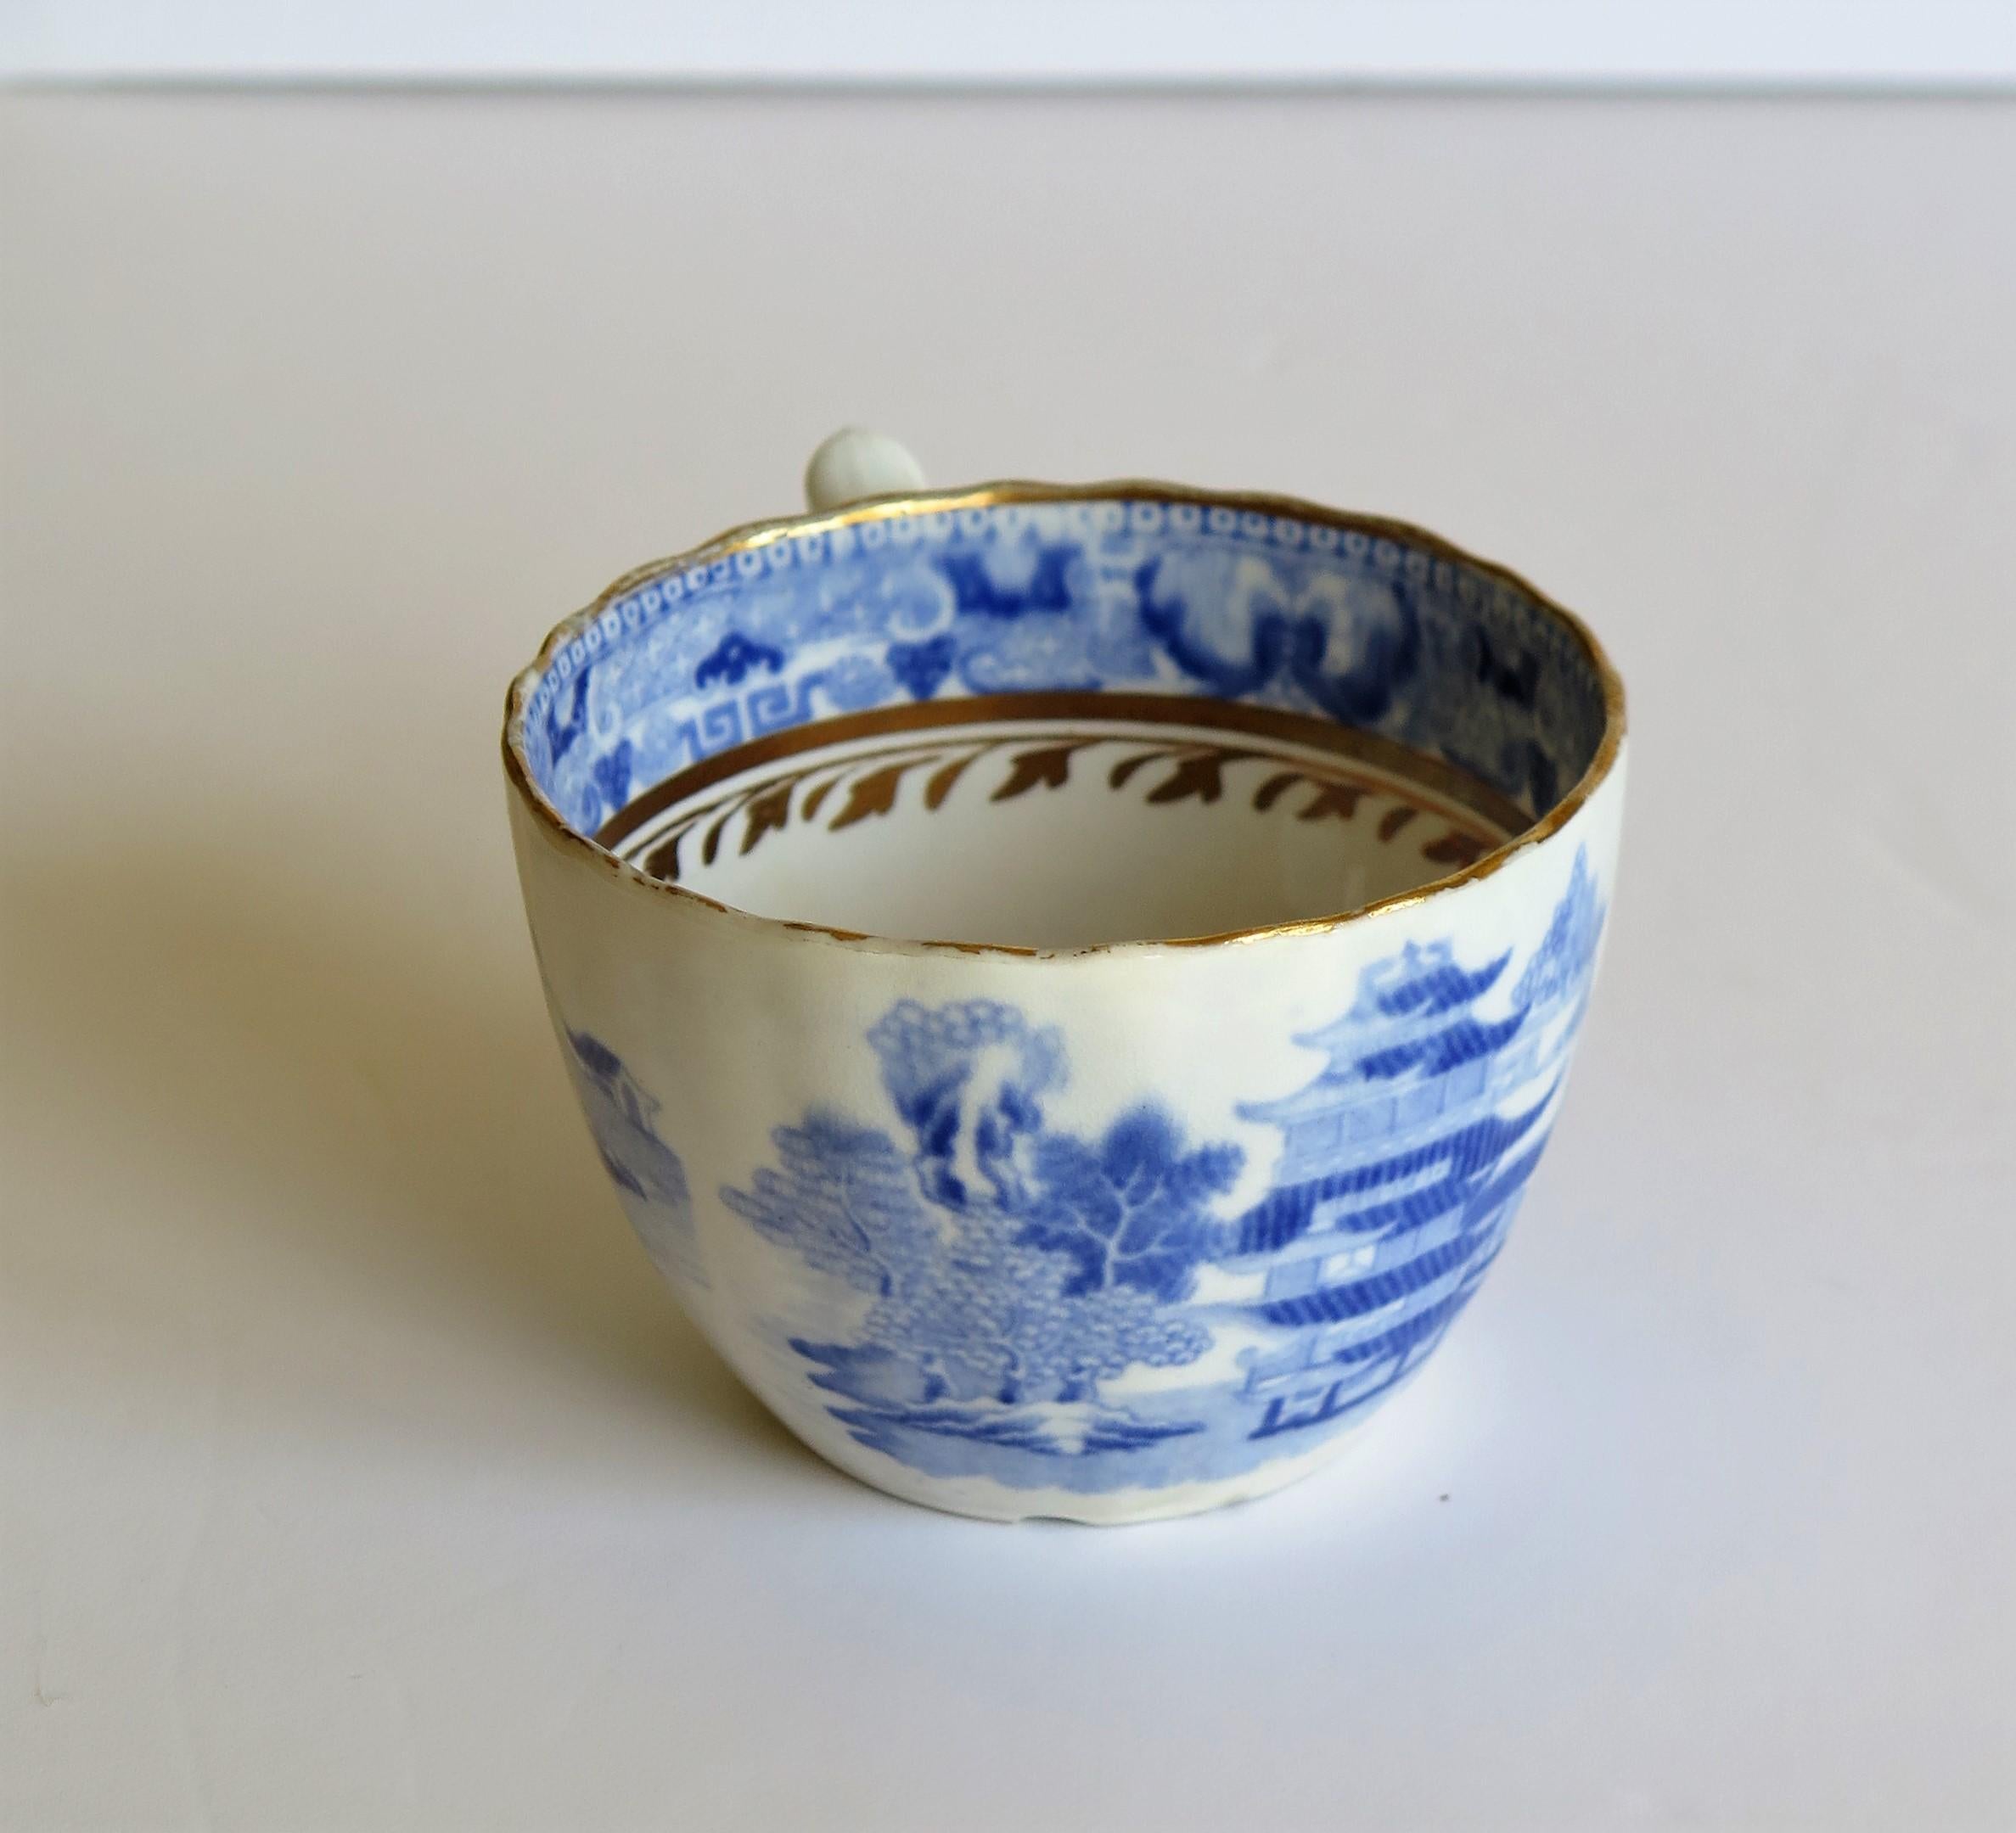 Miles Mason Porcelain Pair of Tea Cups Broseley Blue and White Pattern, Ca. 1805 For Sale 2